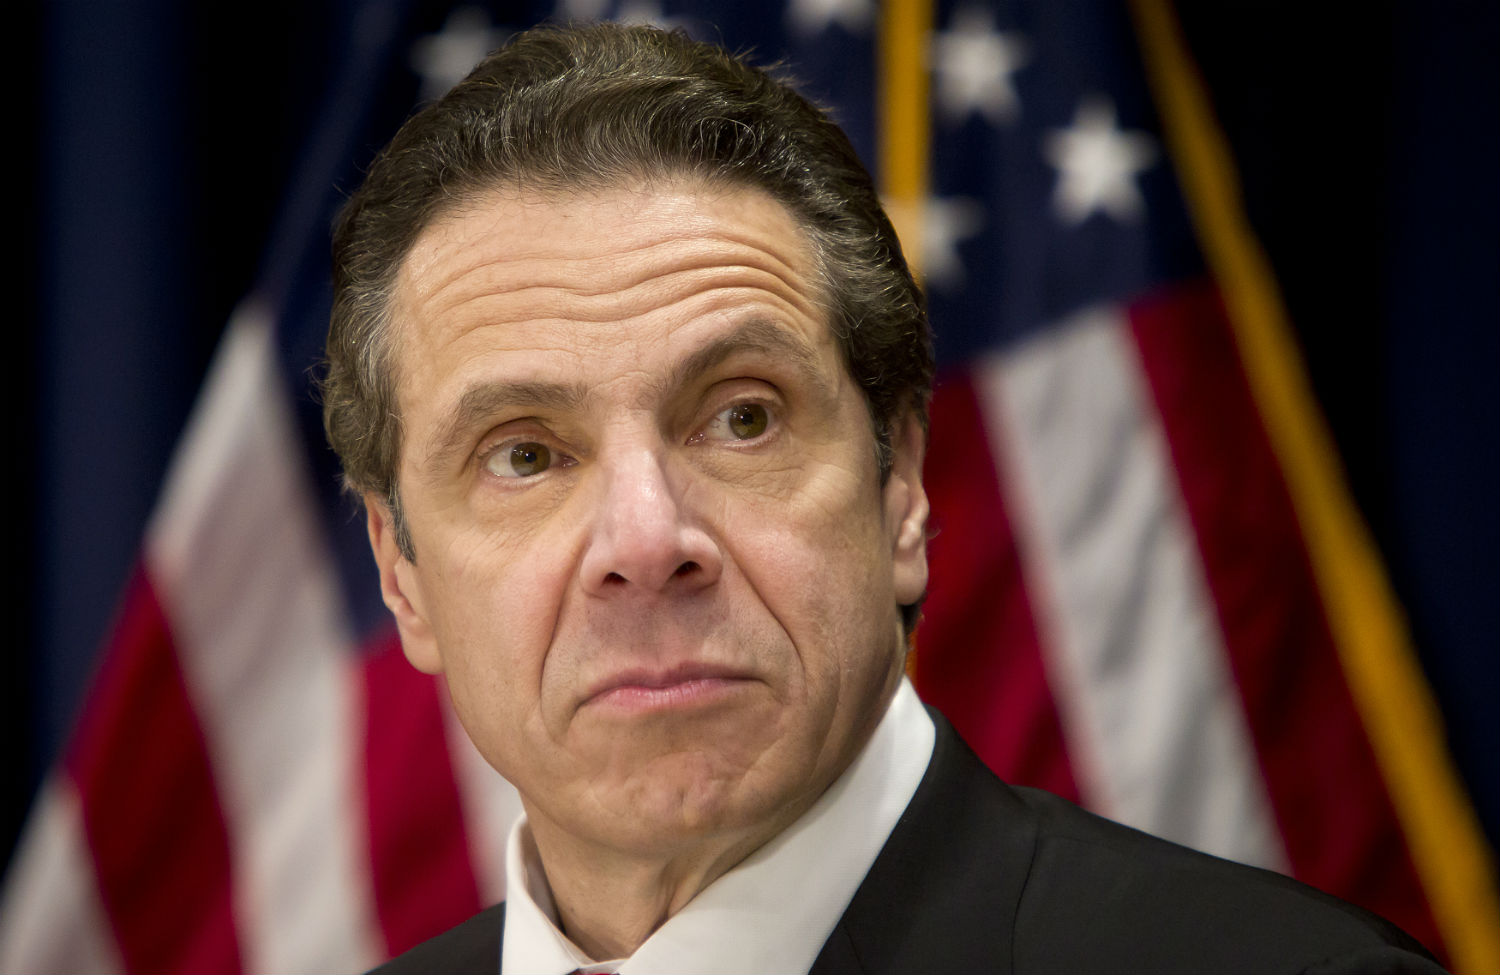 Why Is Andrew Cuomo Pushing an Education ‘Cure’ That’s Worse Than the Disease?